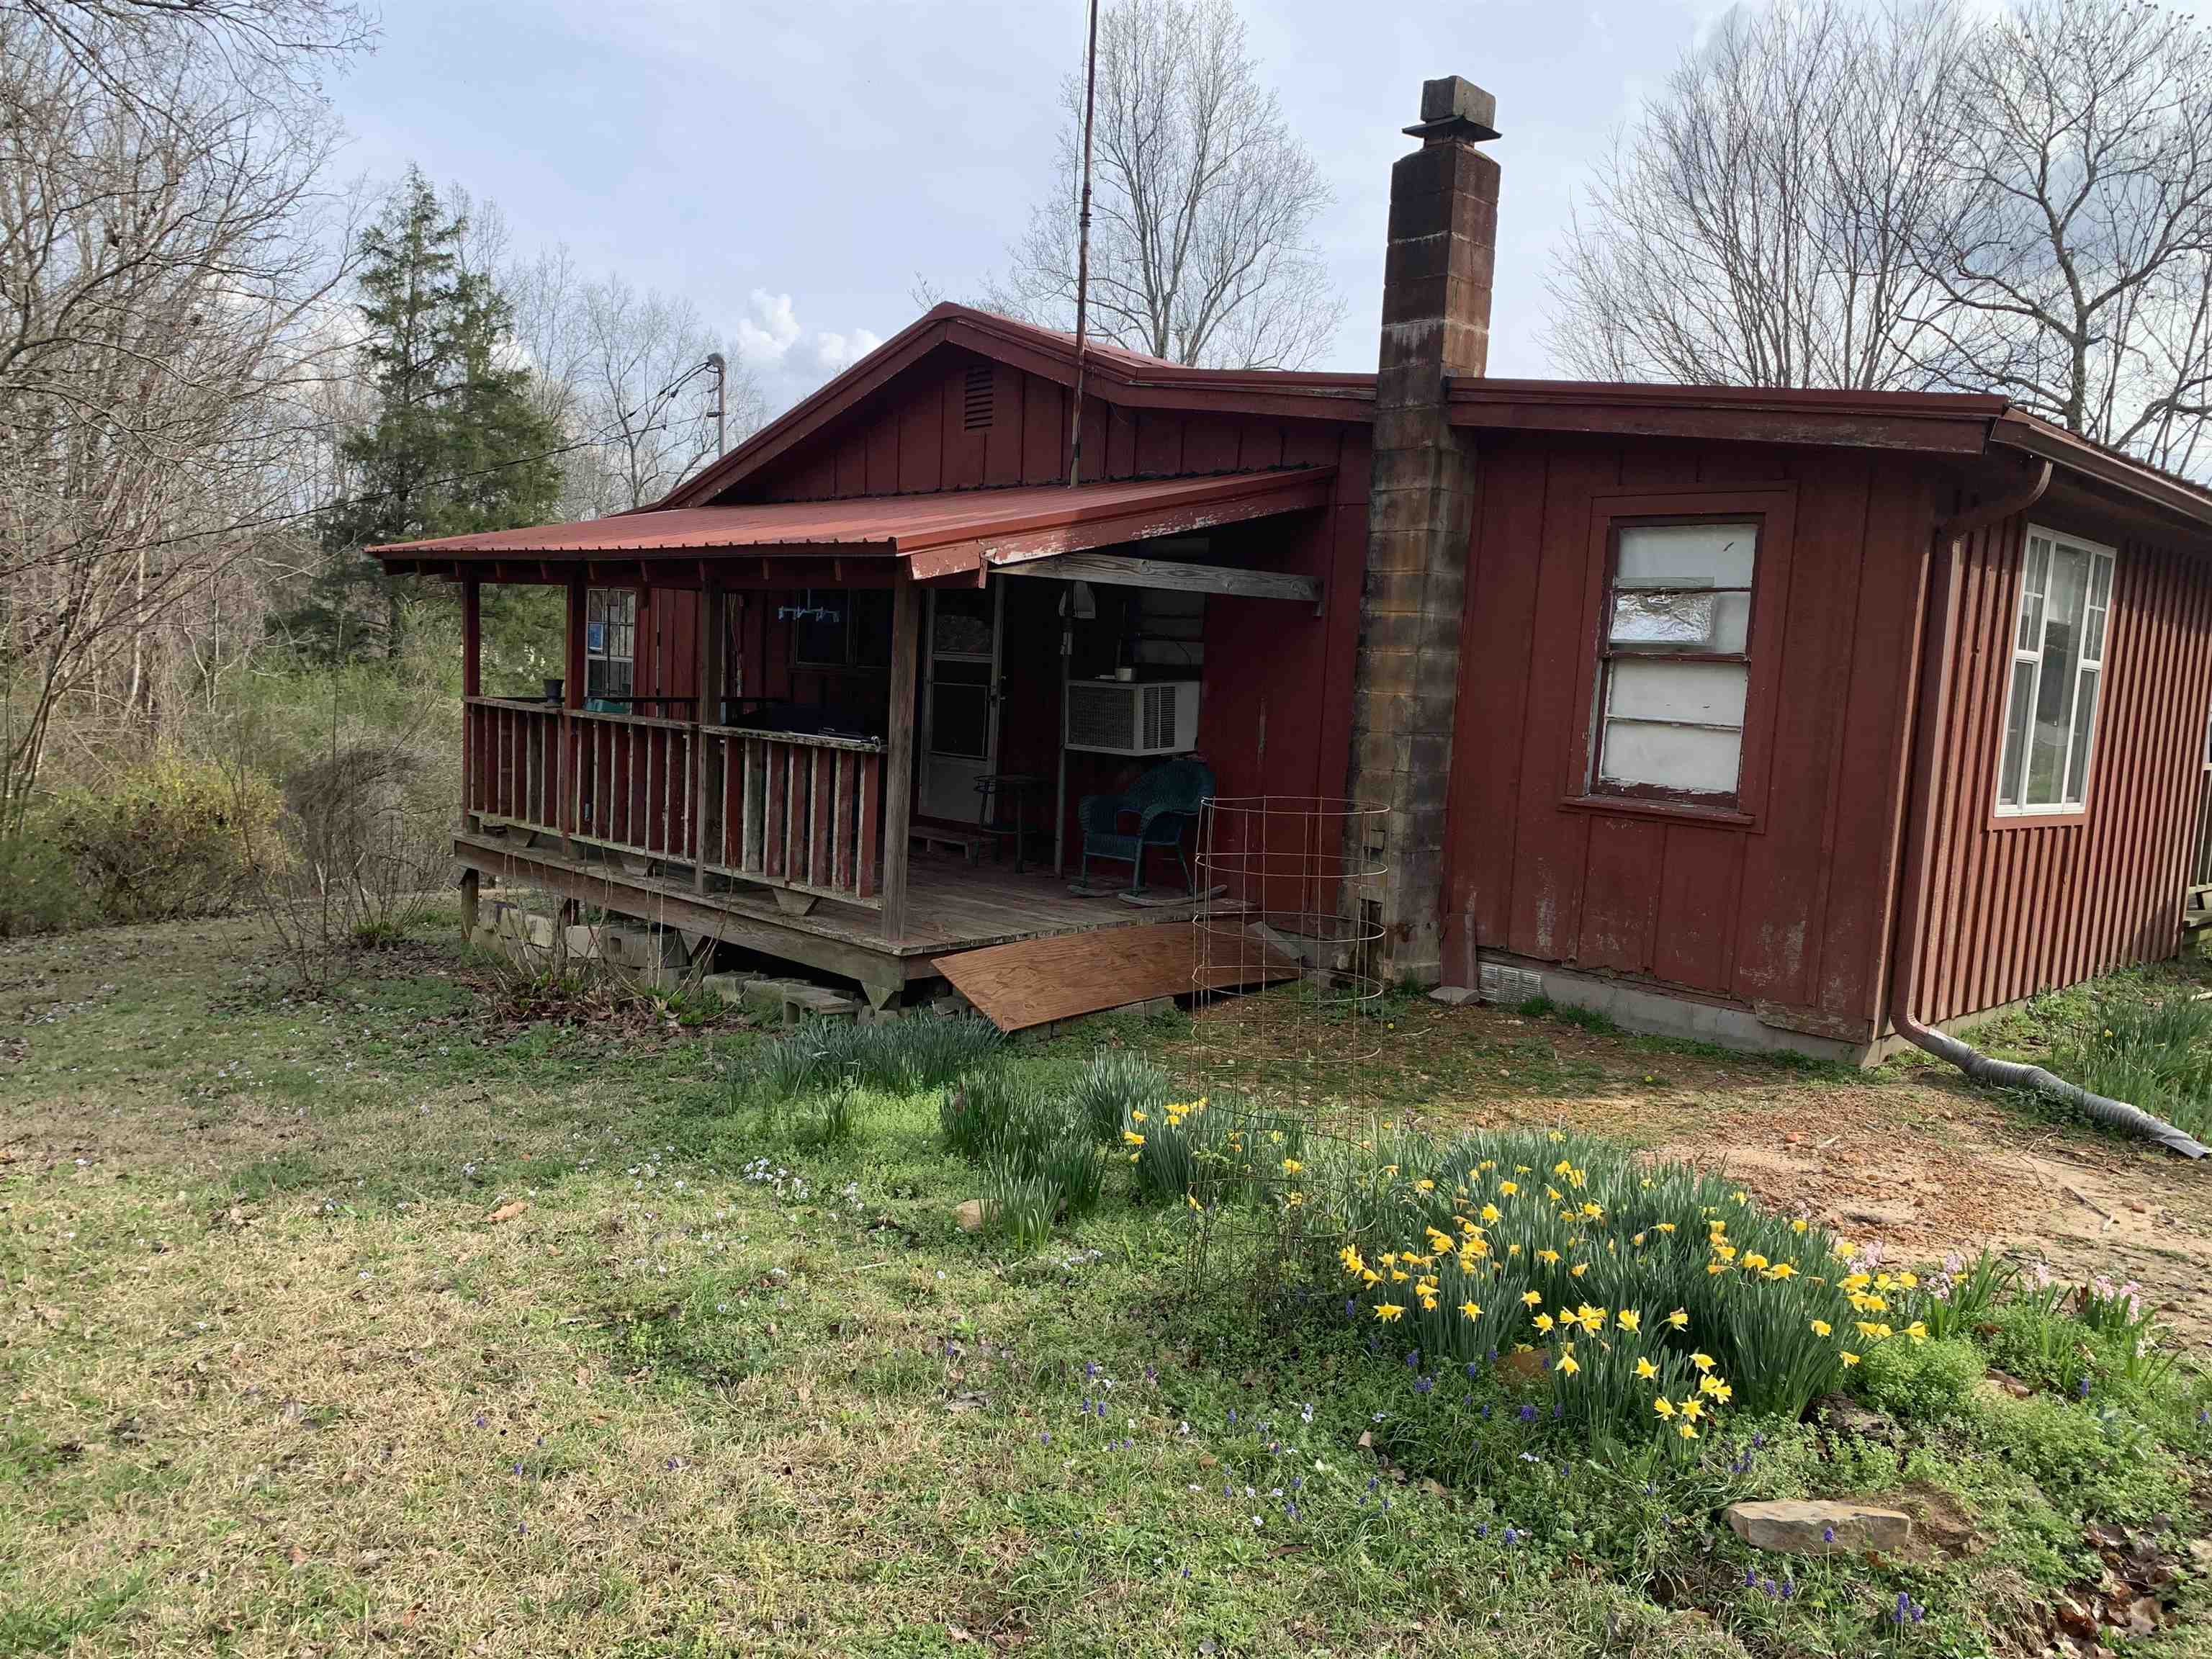 Priced to sell - great fixer upper with lots of possibilities!!  This property features 2.74 acres with a nice front porch and side porch.  3 Bedrooms and 1 bathroom with chestnut trees, plum trees, grape vines and blueberry bushes.  There is a storm shelter underneath outbuilding!  Call to schedule your private showing today!!